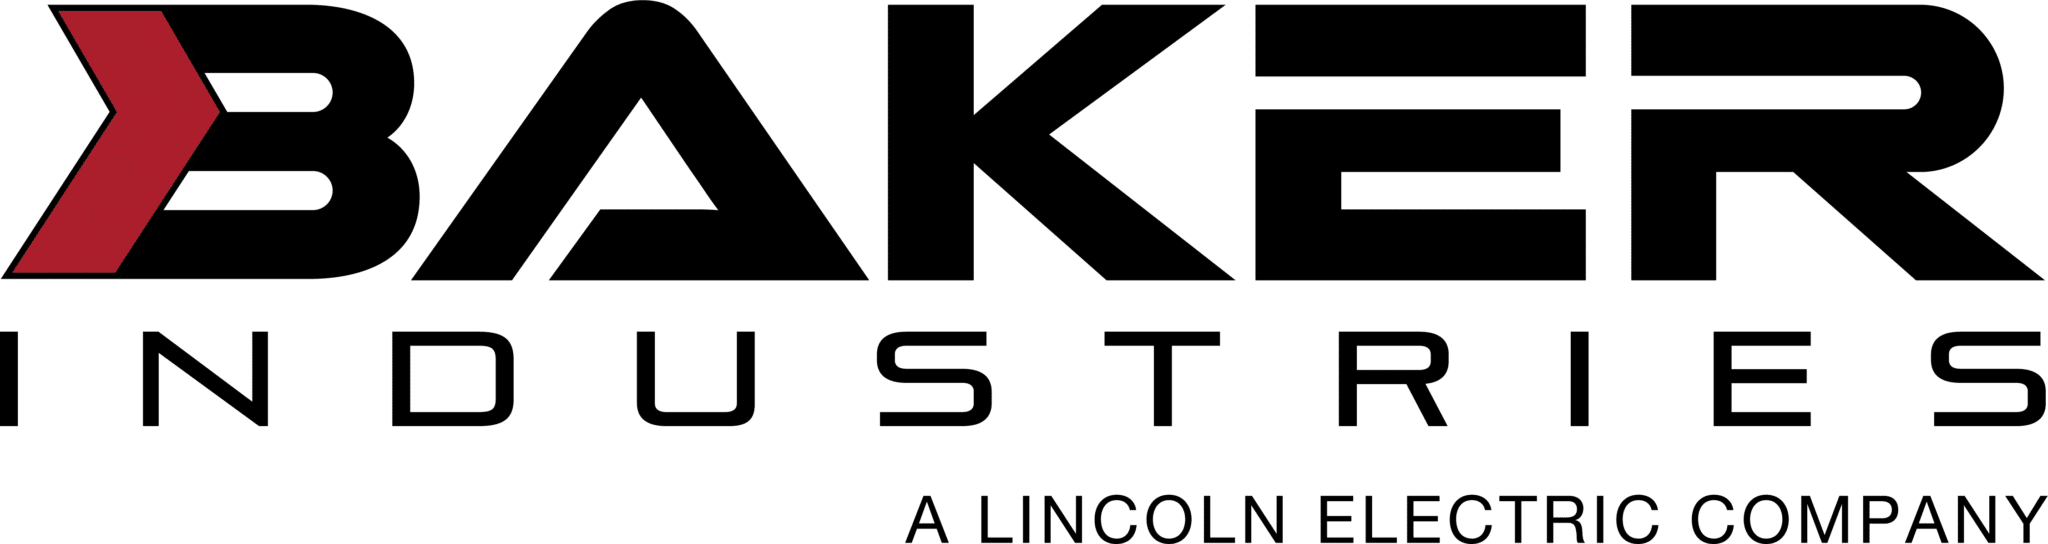 The Baker Industries, a Lincoln Electric company, logo in red and black